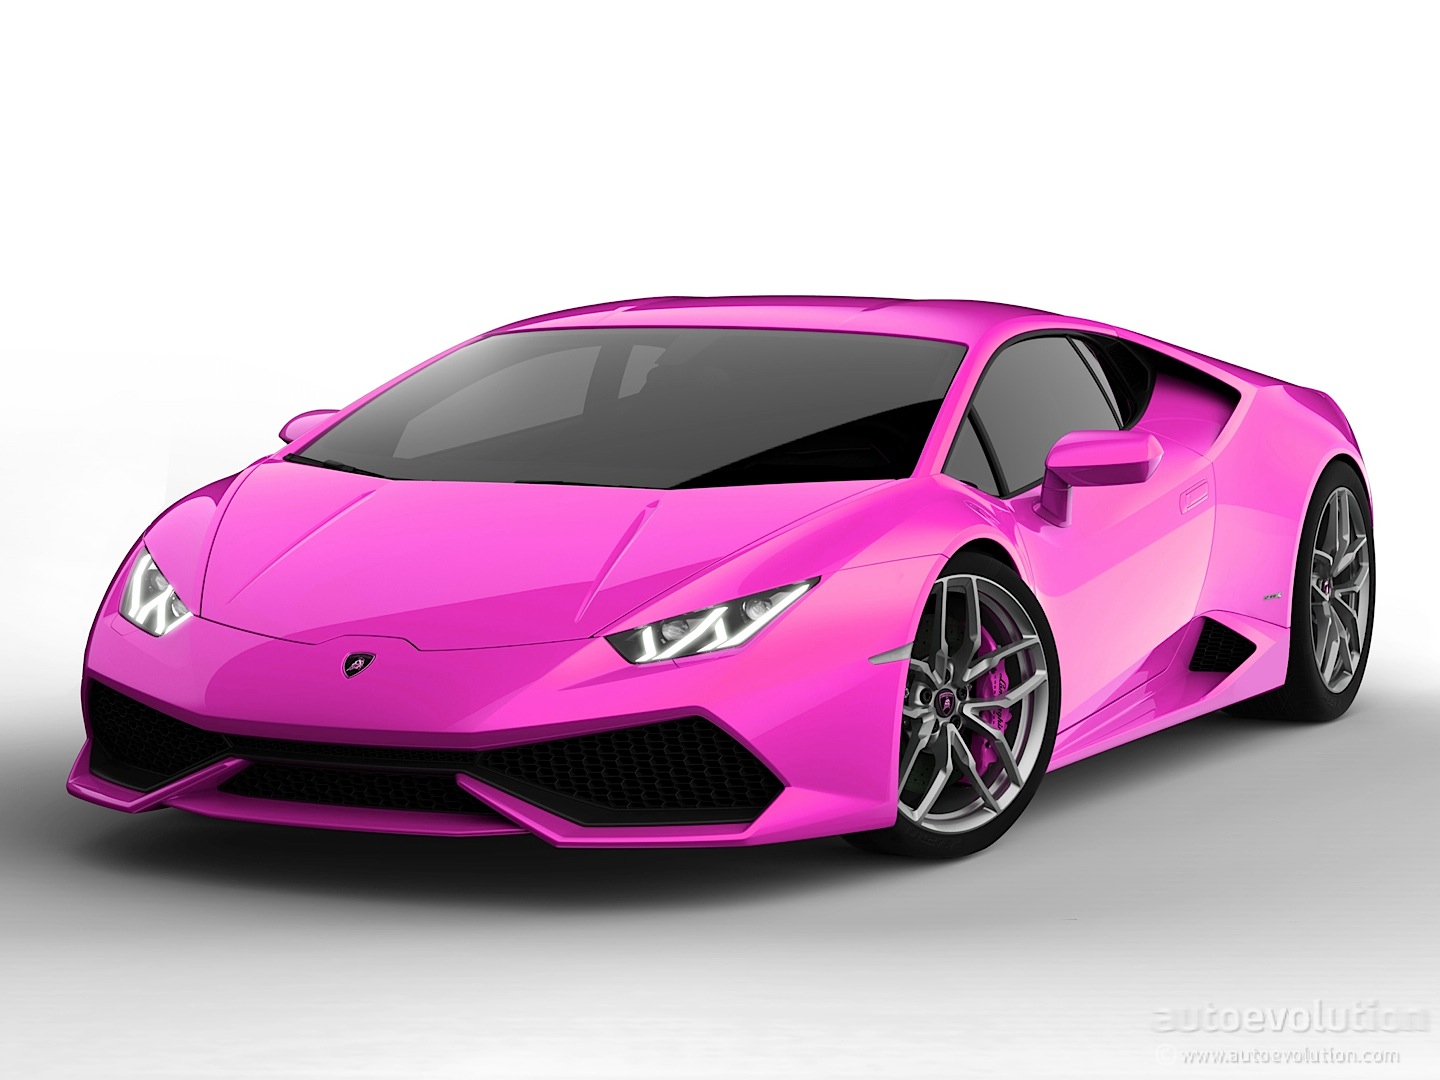 http://s1.cdn.autoevolution.com/images/news/gallery/lamborghini-huracan-in-all-the-crazy-colors-photo-gallery_9.jpg